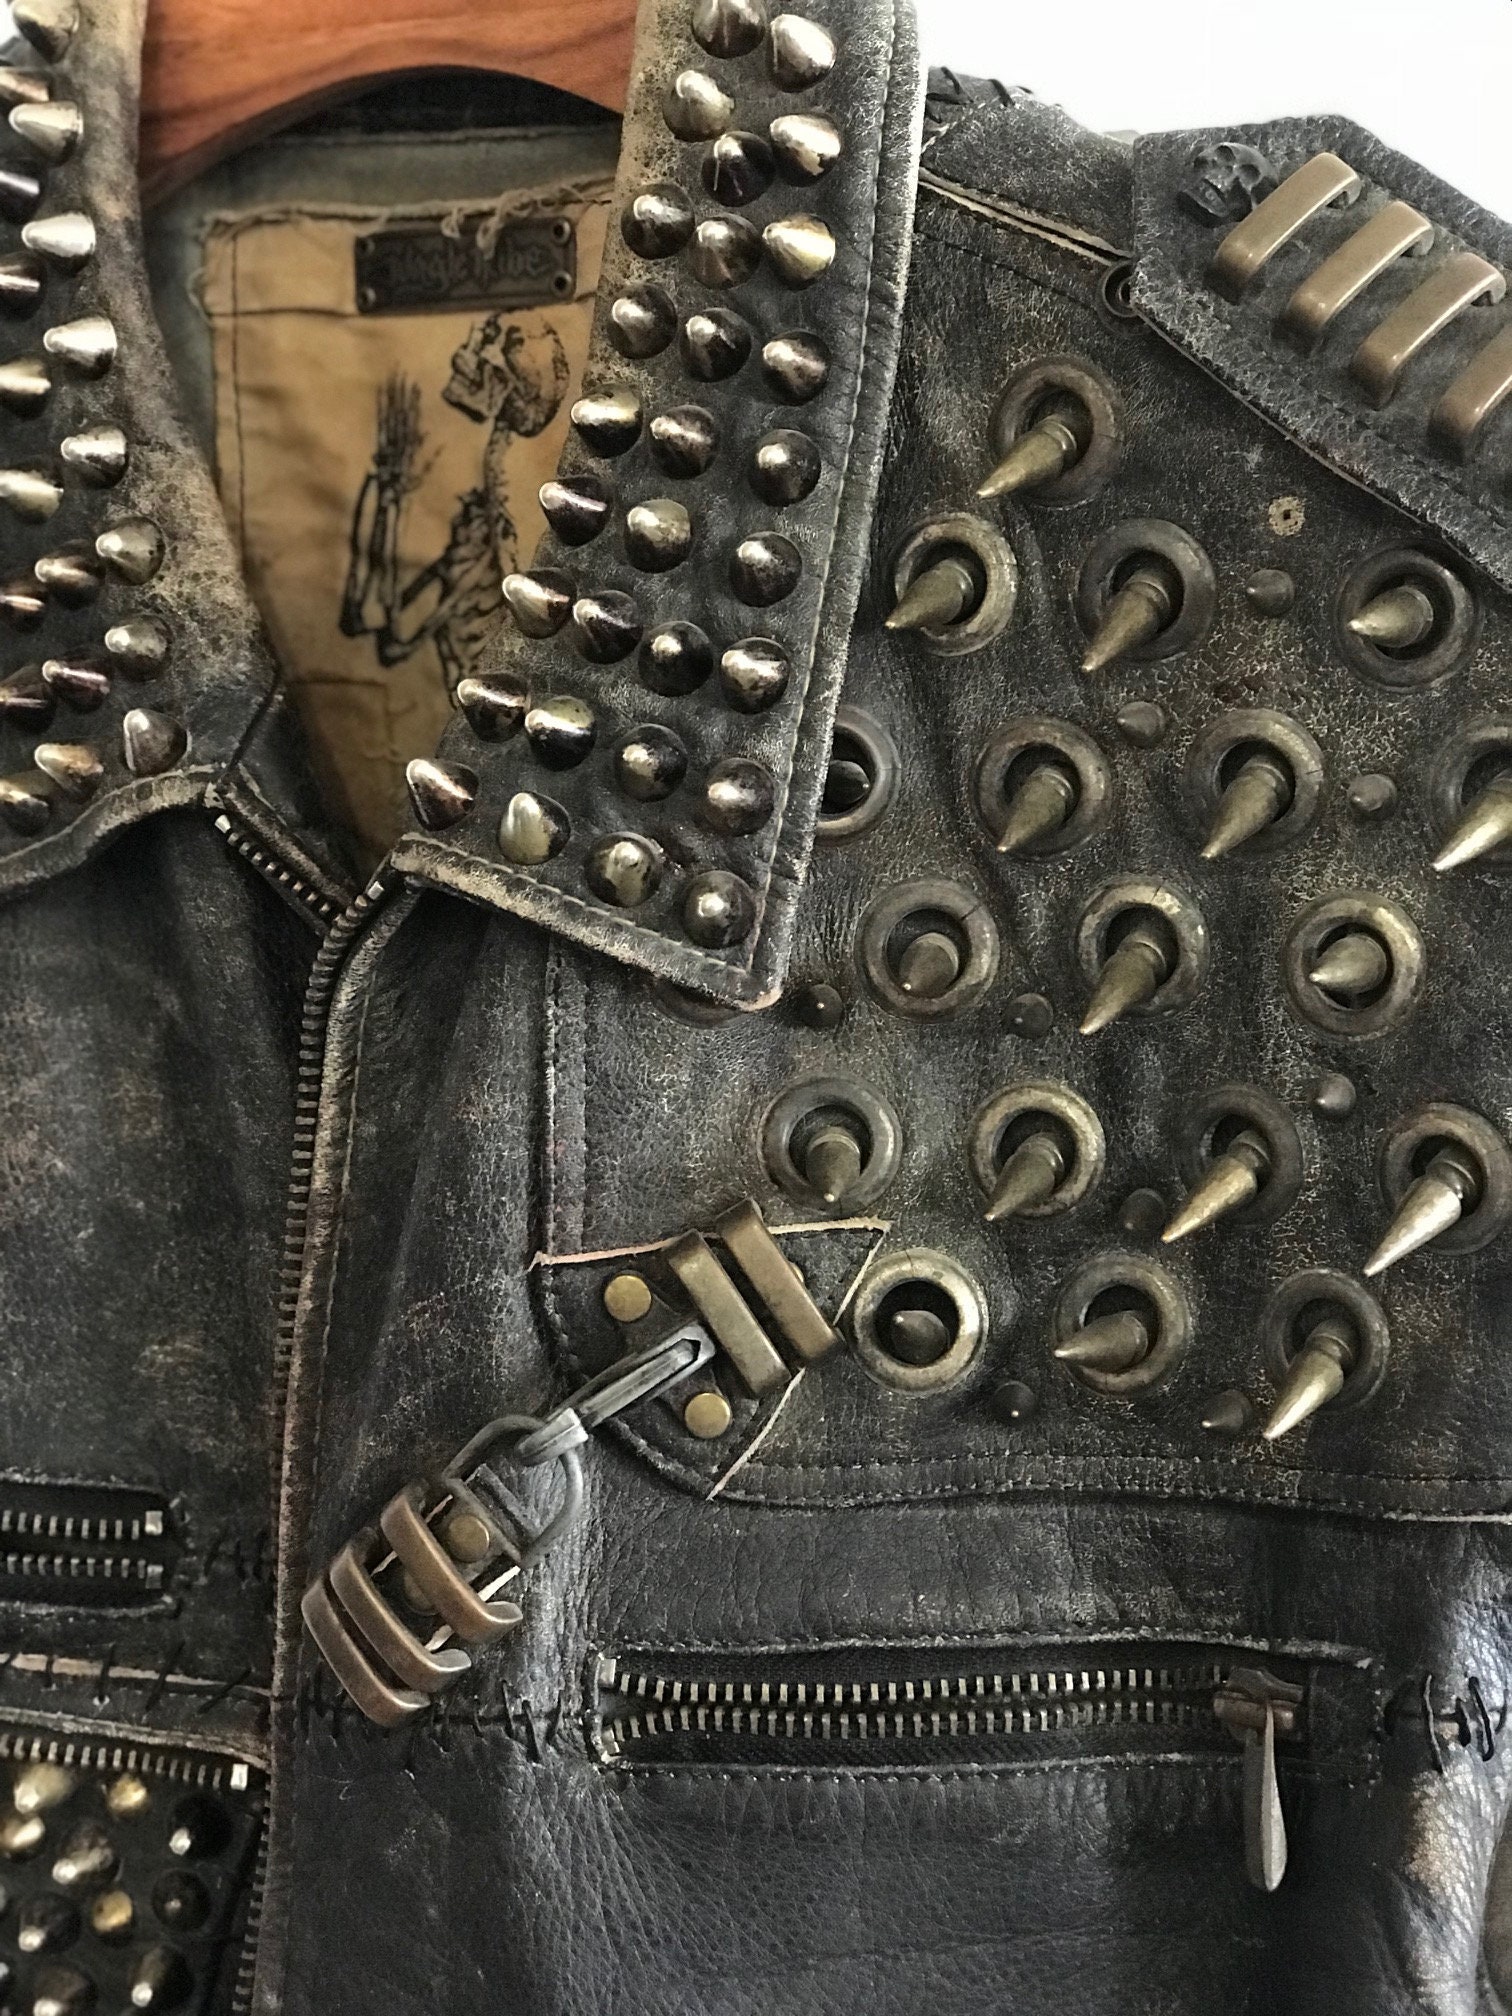 INDUSTRIAL UNREST Leather Spiked Studded and Distressed Jacket Cut Vest